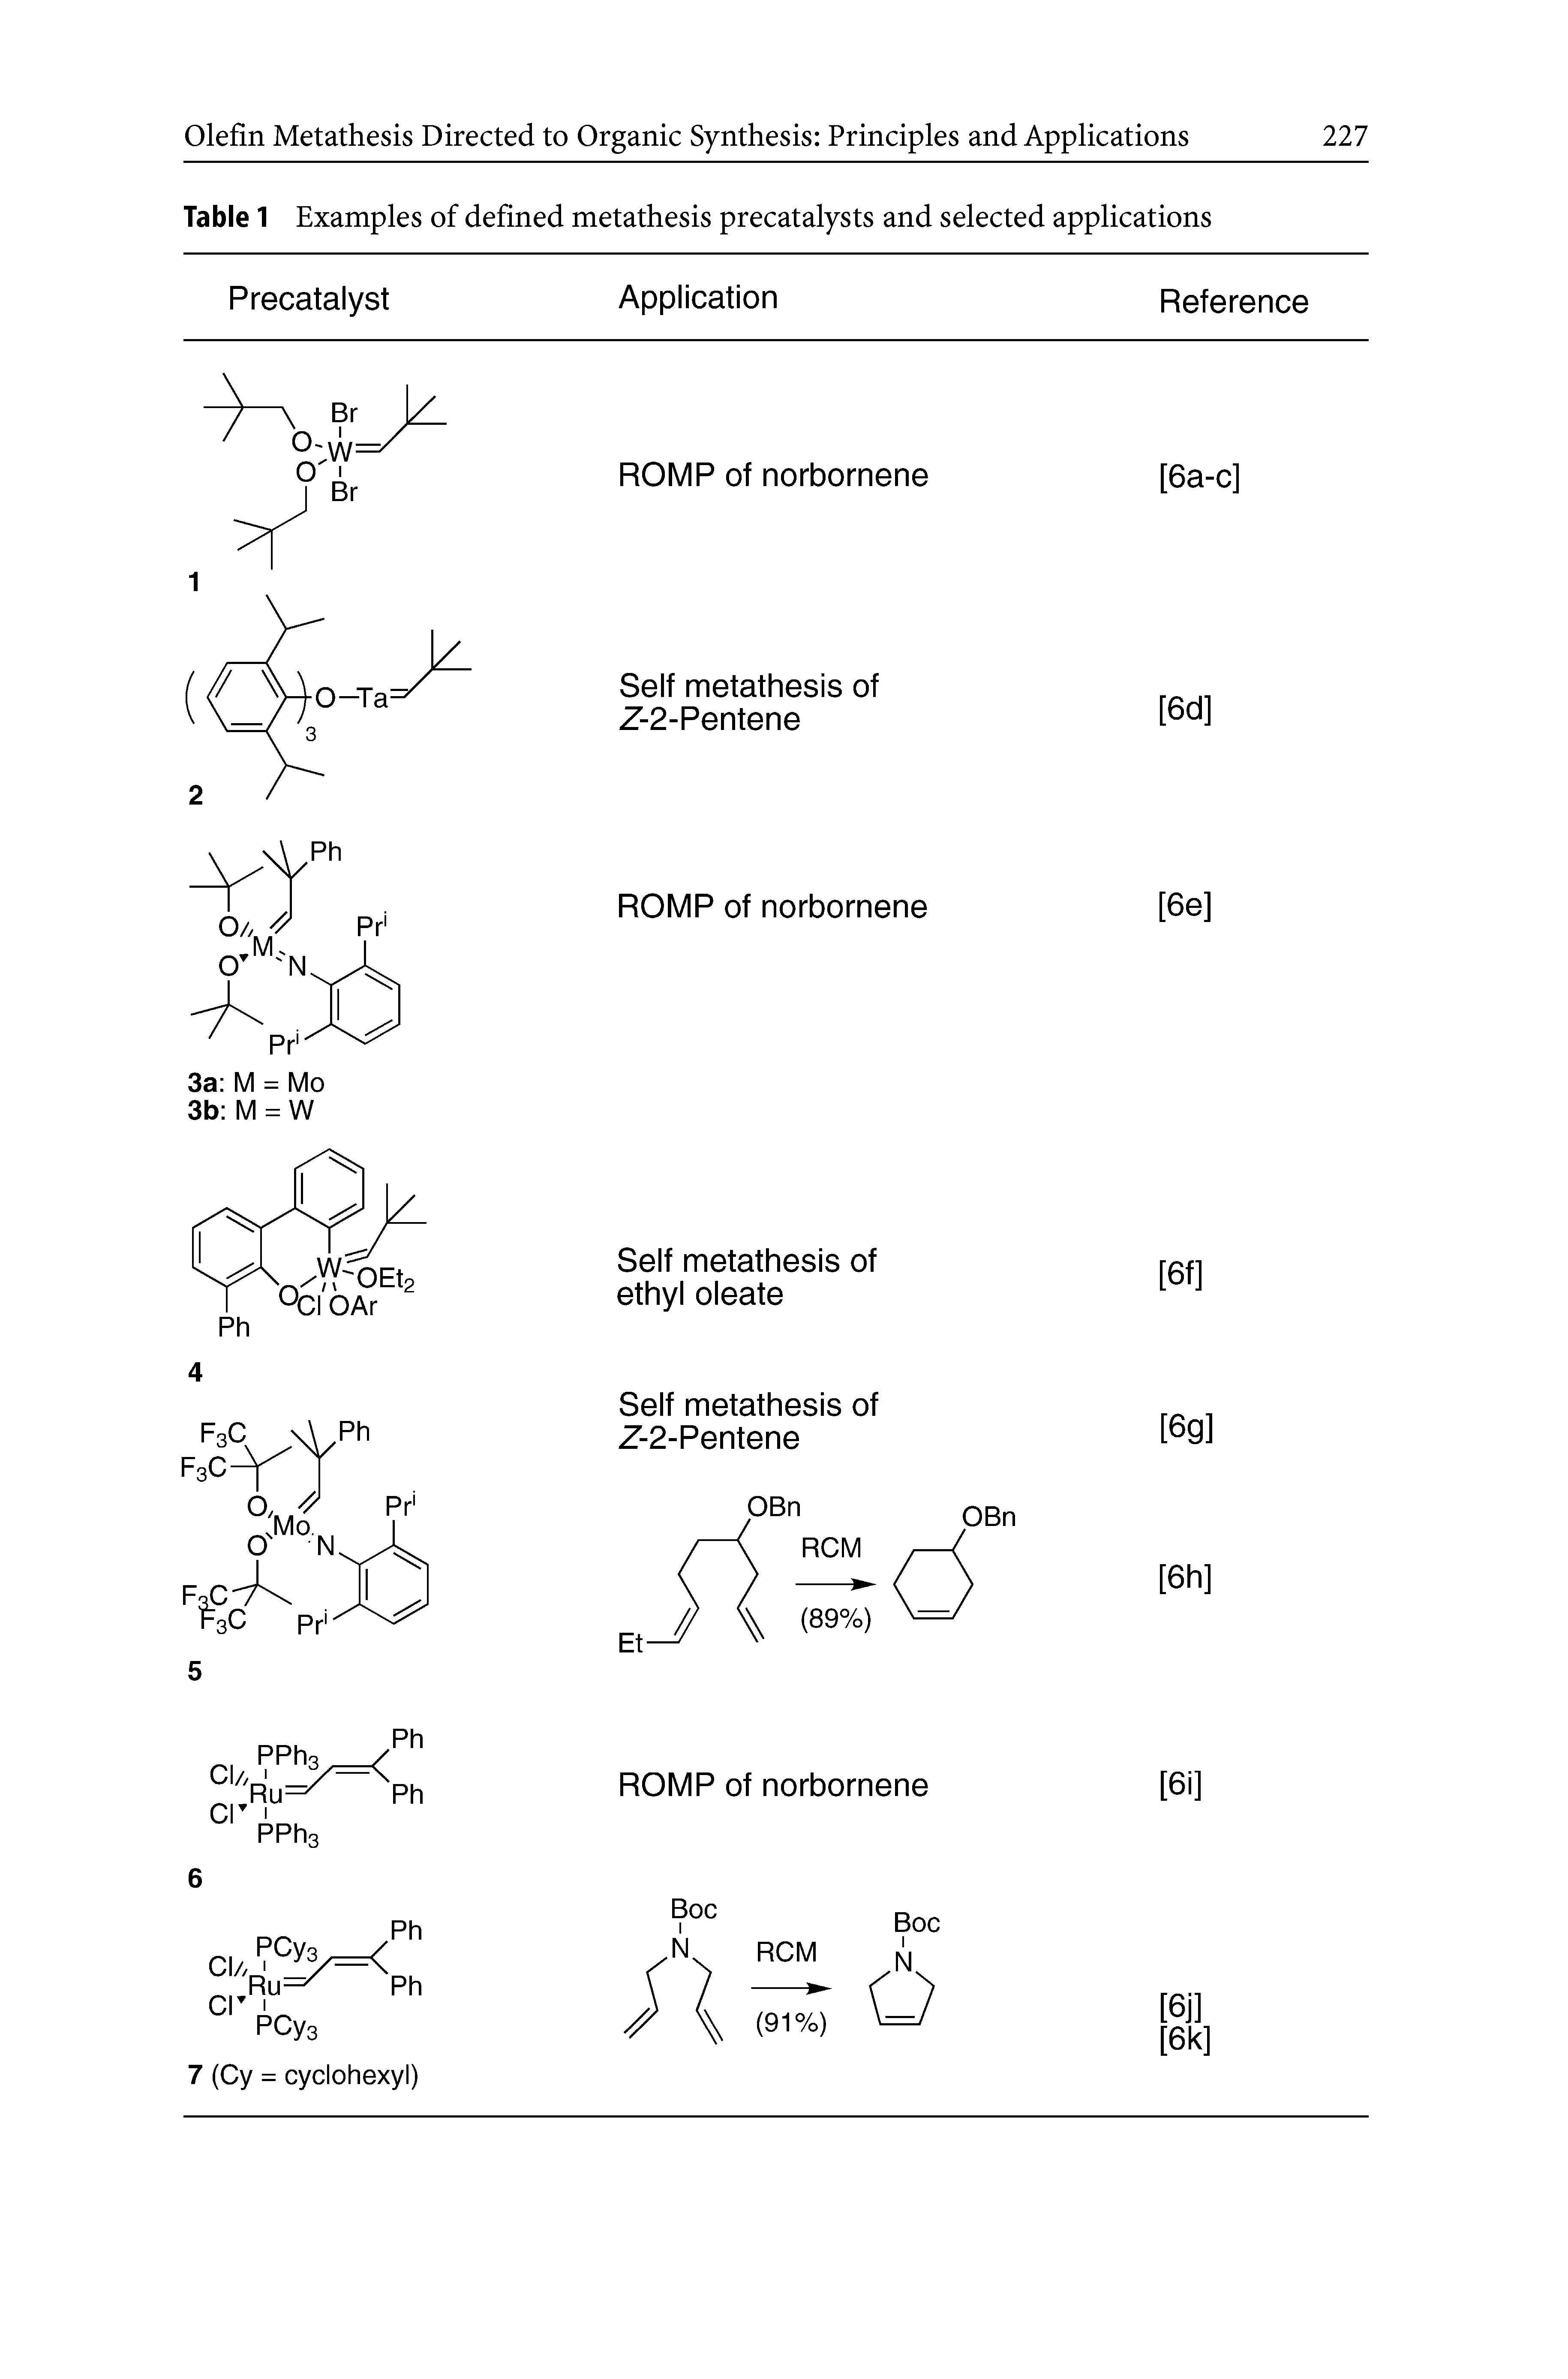 Table 1 Examples of defined metathesis precatalysts and selected applications...